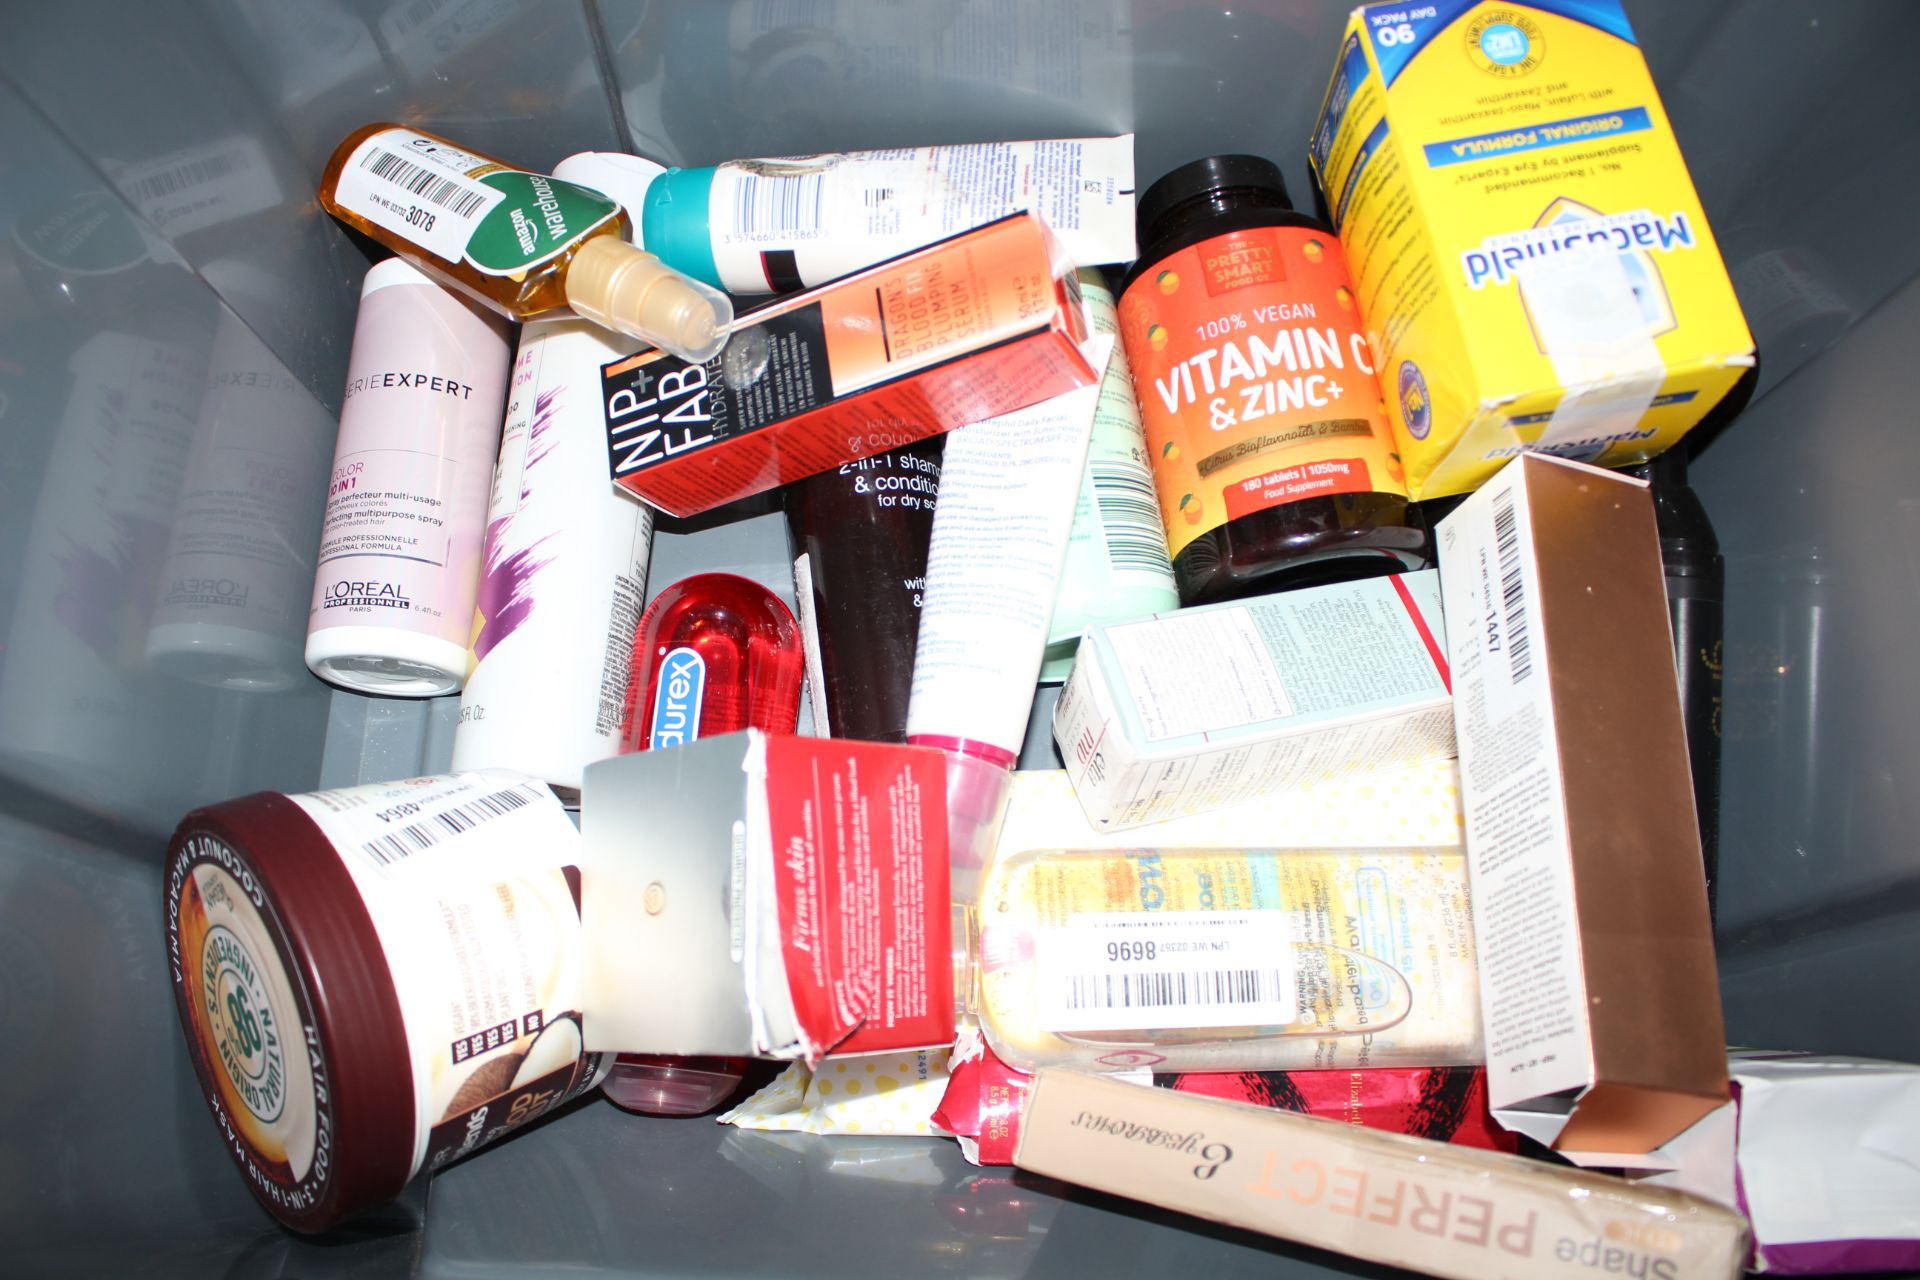 LARGE AMOUNT ASSORTED ITEMS (IMAGE DEPICTS STOCK/GREY BOX NOT INCLUDED)Condition ReportAppraisal